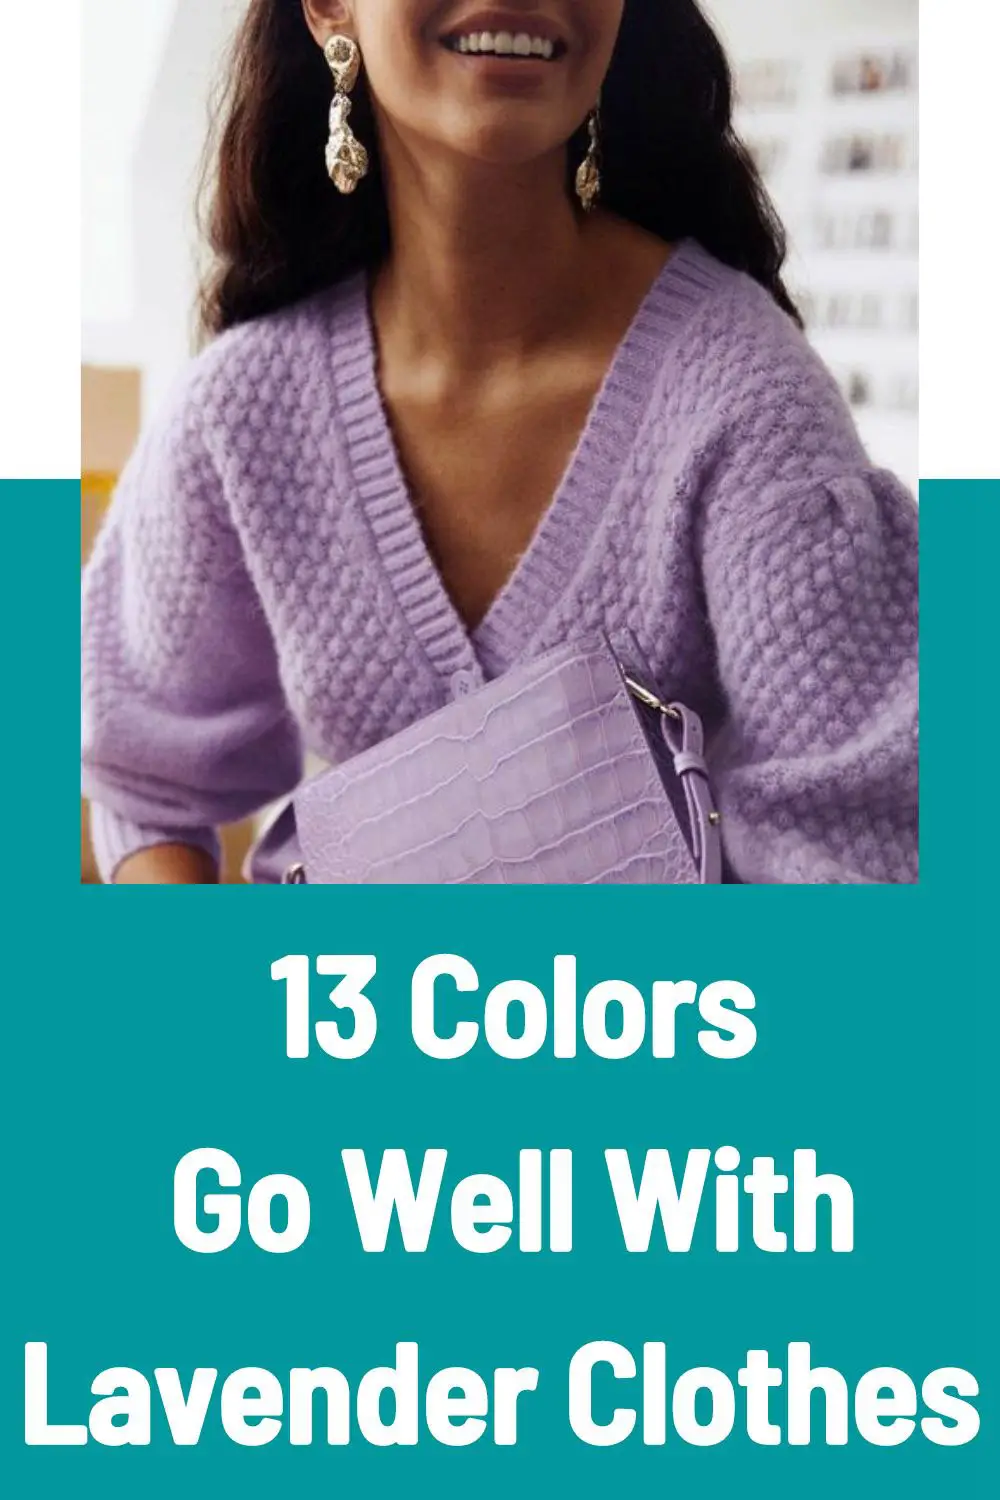 13 Colors That Go Well With Lavender Clothes